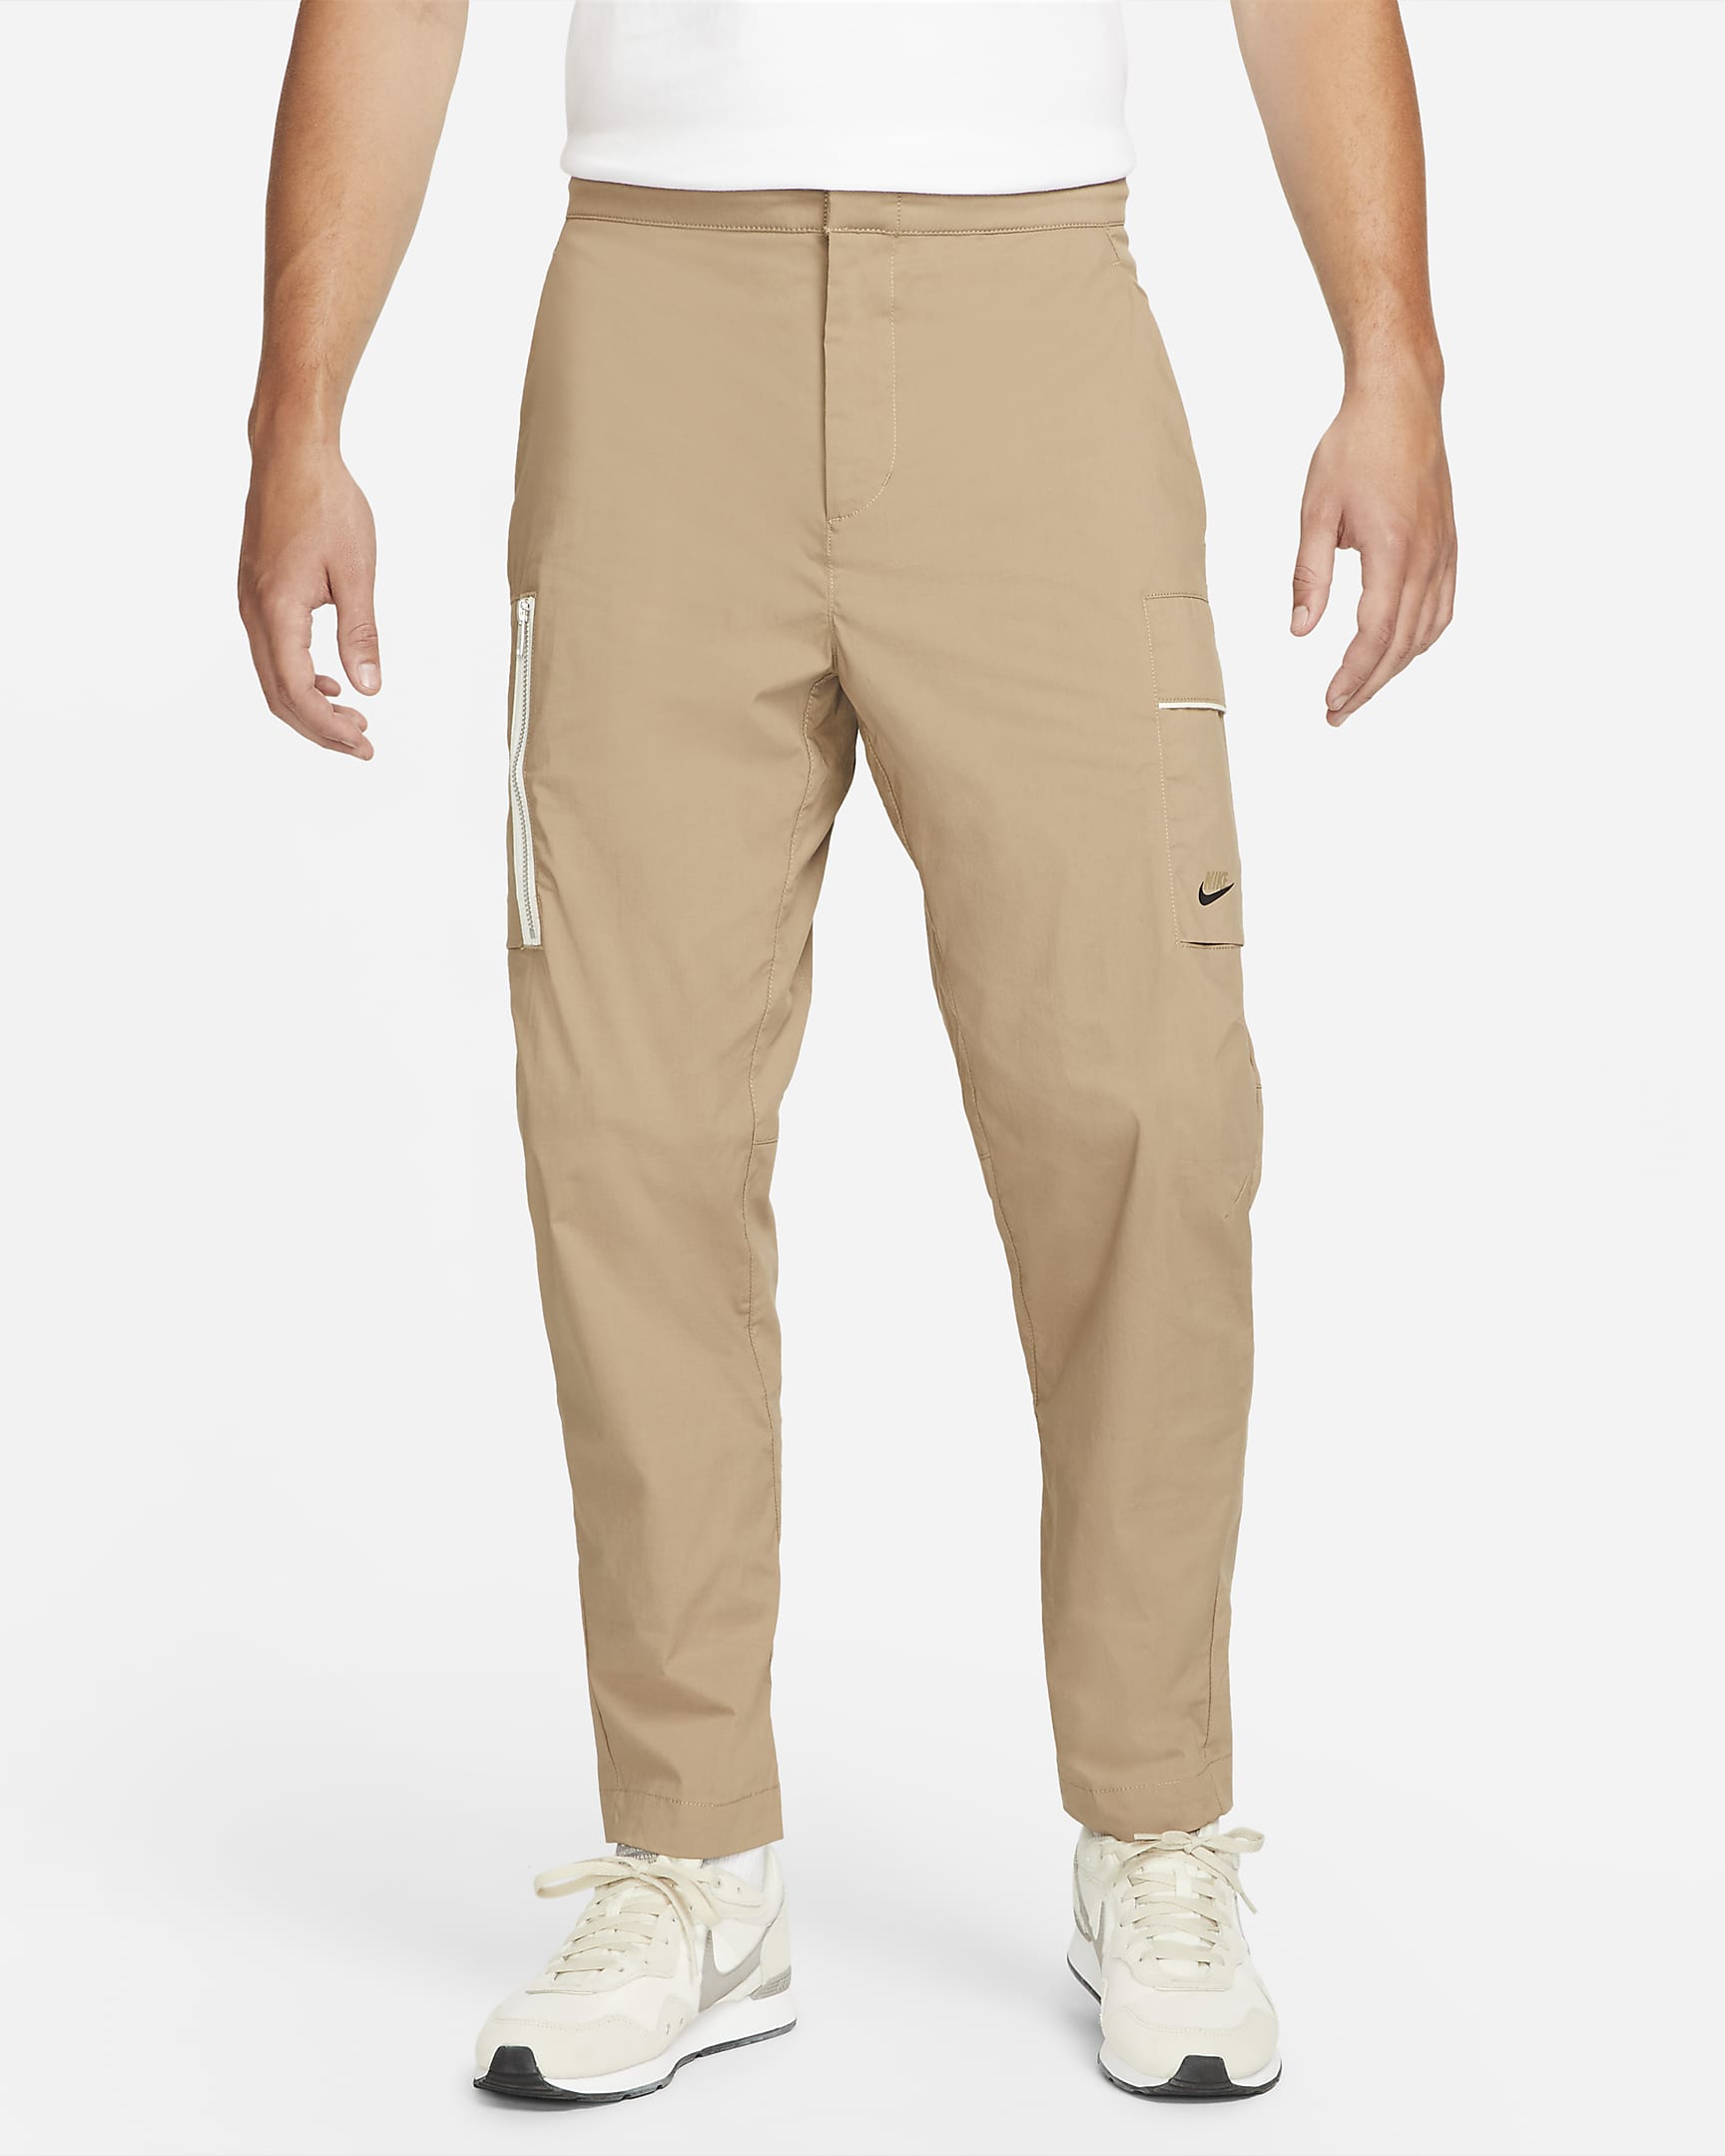 nike-sportswear-style-essentials-mens-woven-unlined-cargo-pants-8DqpVJ.png